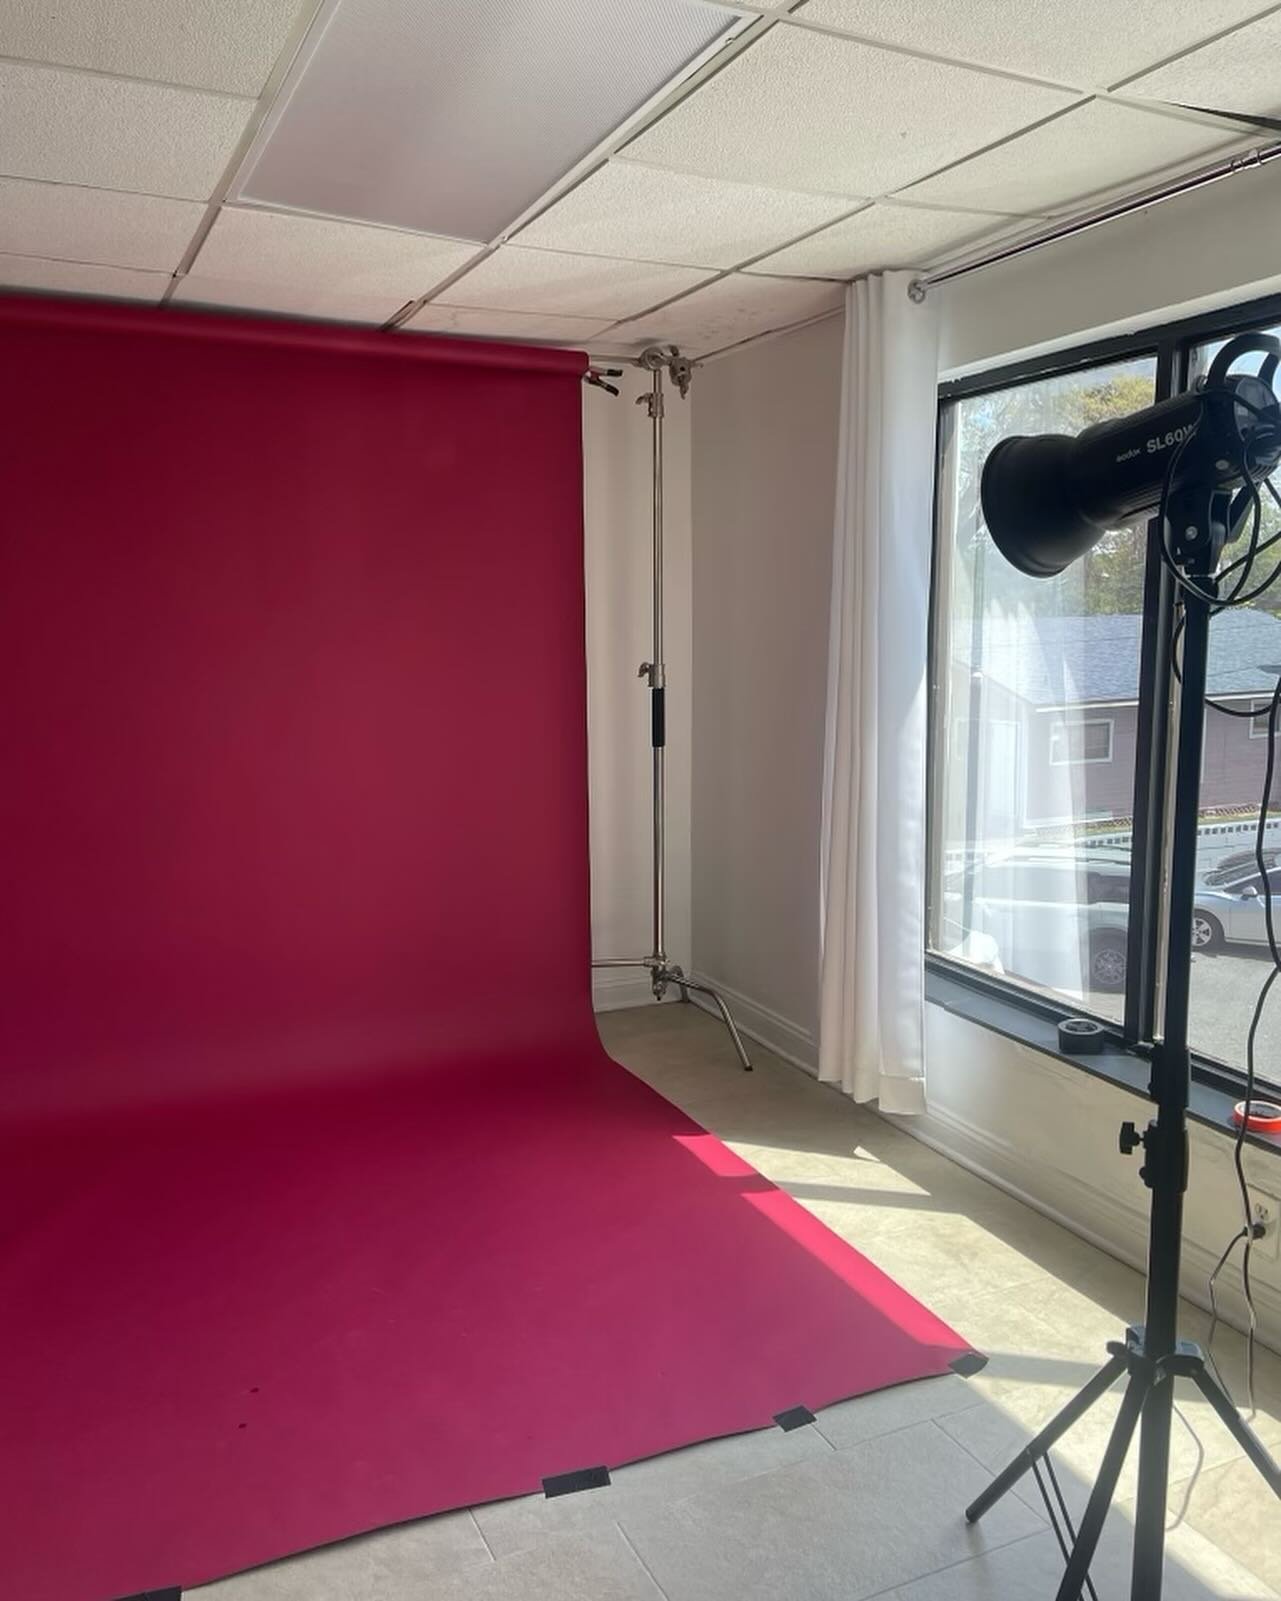 we just want to remind you how many different vibes can be created at the studio 👀

#orlandophotographer #orlandoportraitphotographer #orlandoeditorialphotographer #floridaeditorialphotographer #buildandbloom #orlandophotostudio #orlandorentals #orl